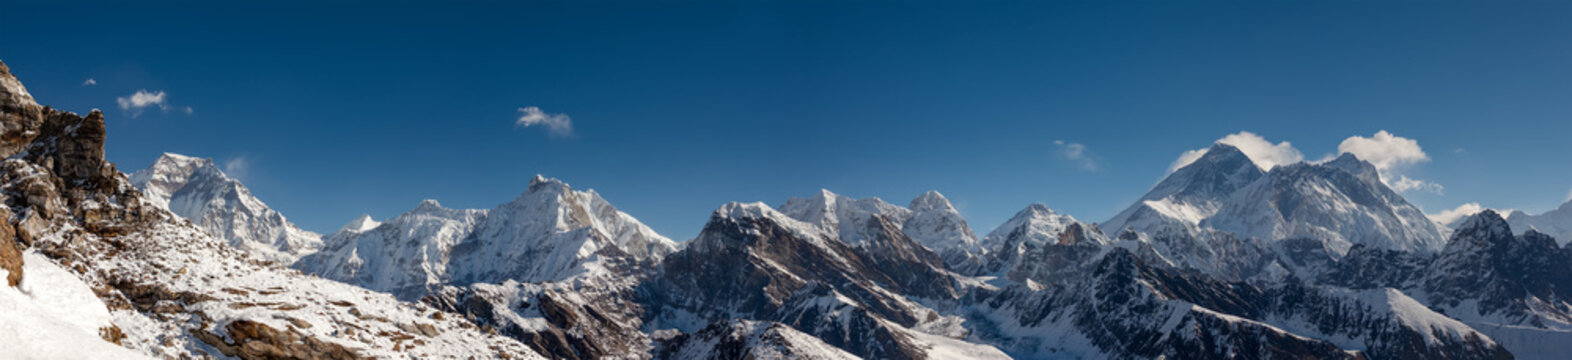 Great panoramic landscapes of the Himalayas in the Khumbu Valley in Nepal